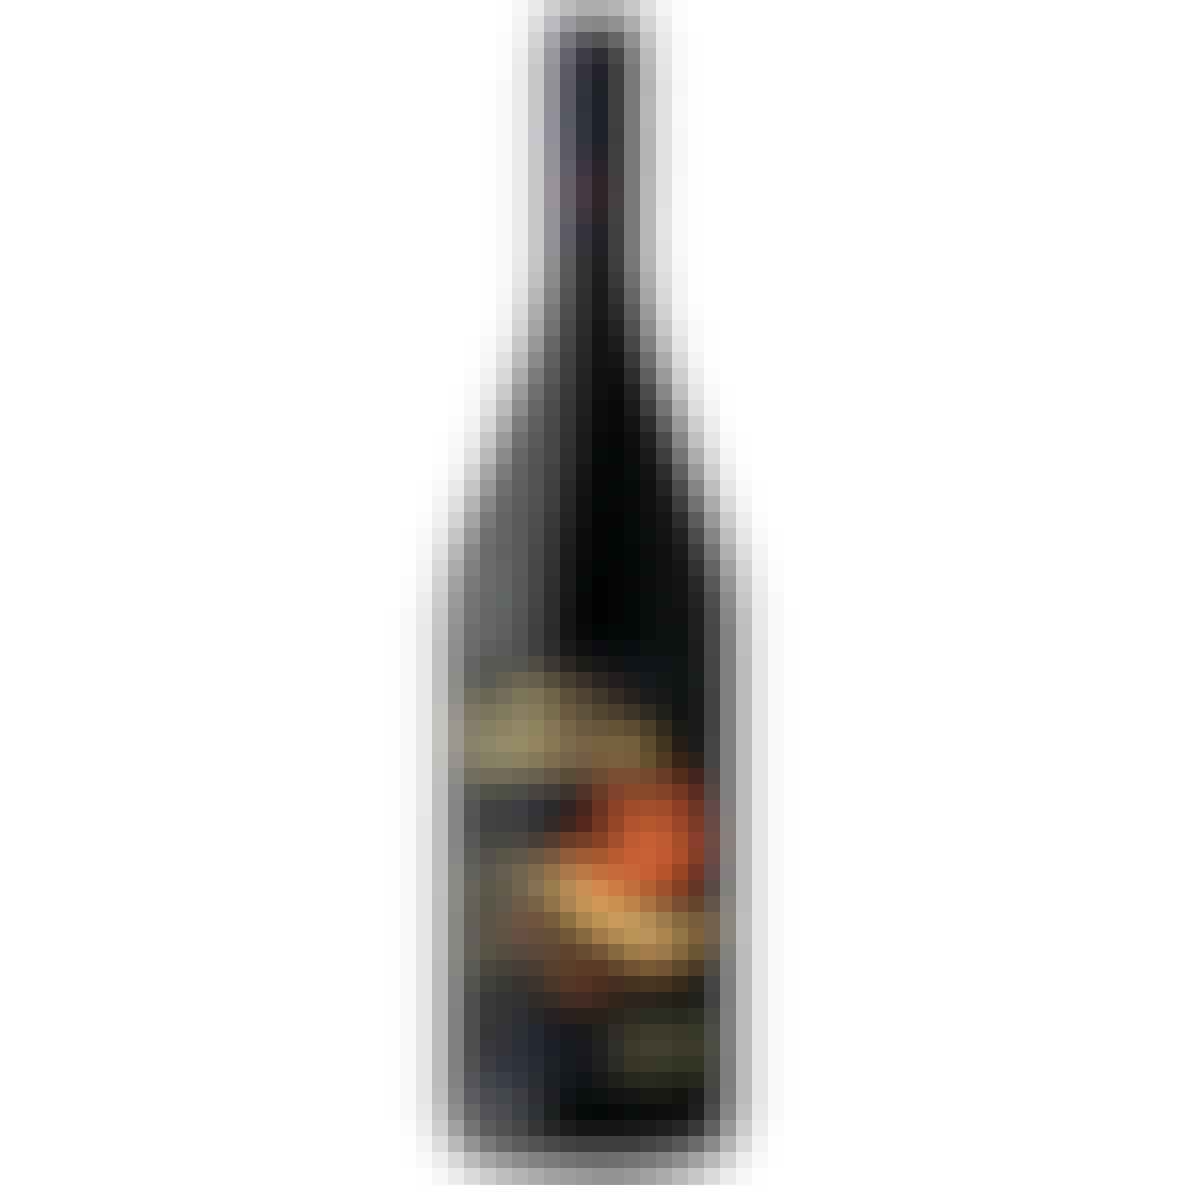 Cycles Gladiator California Red Blend 750ml